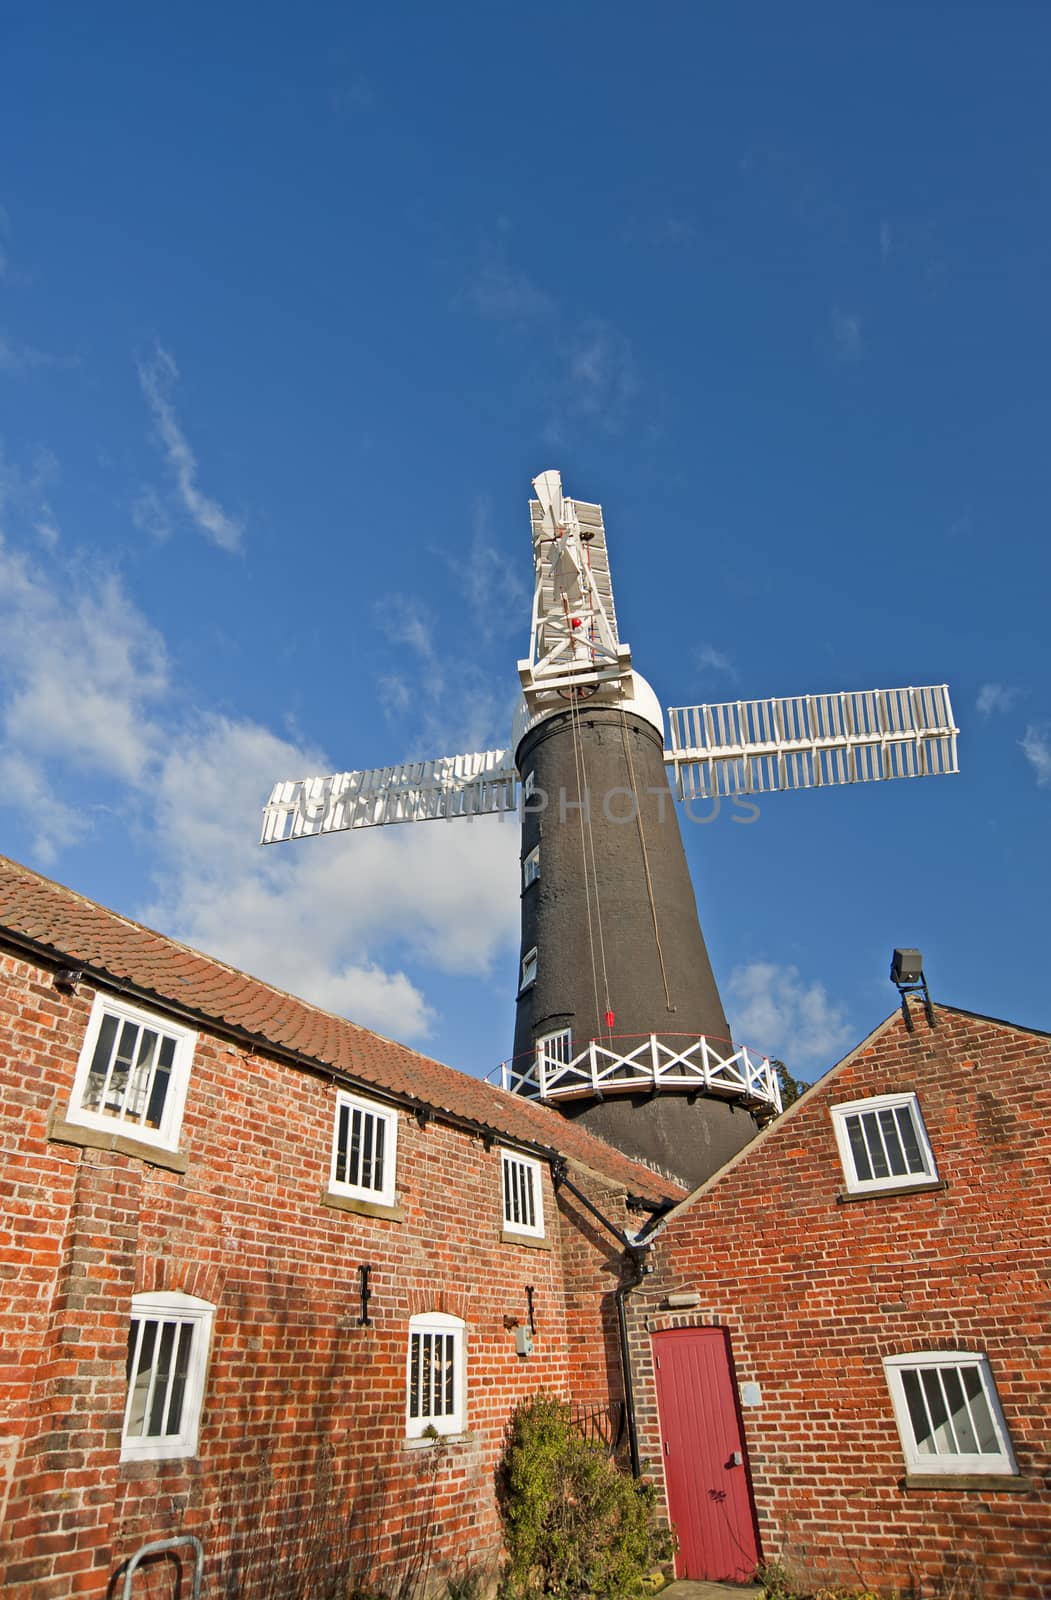 Traditional working windmill at a granary in the countryside